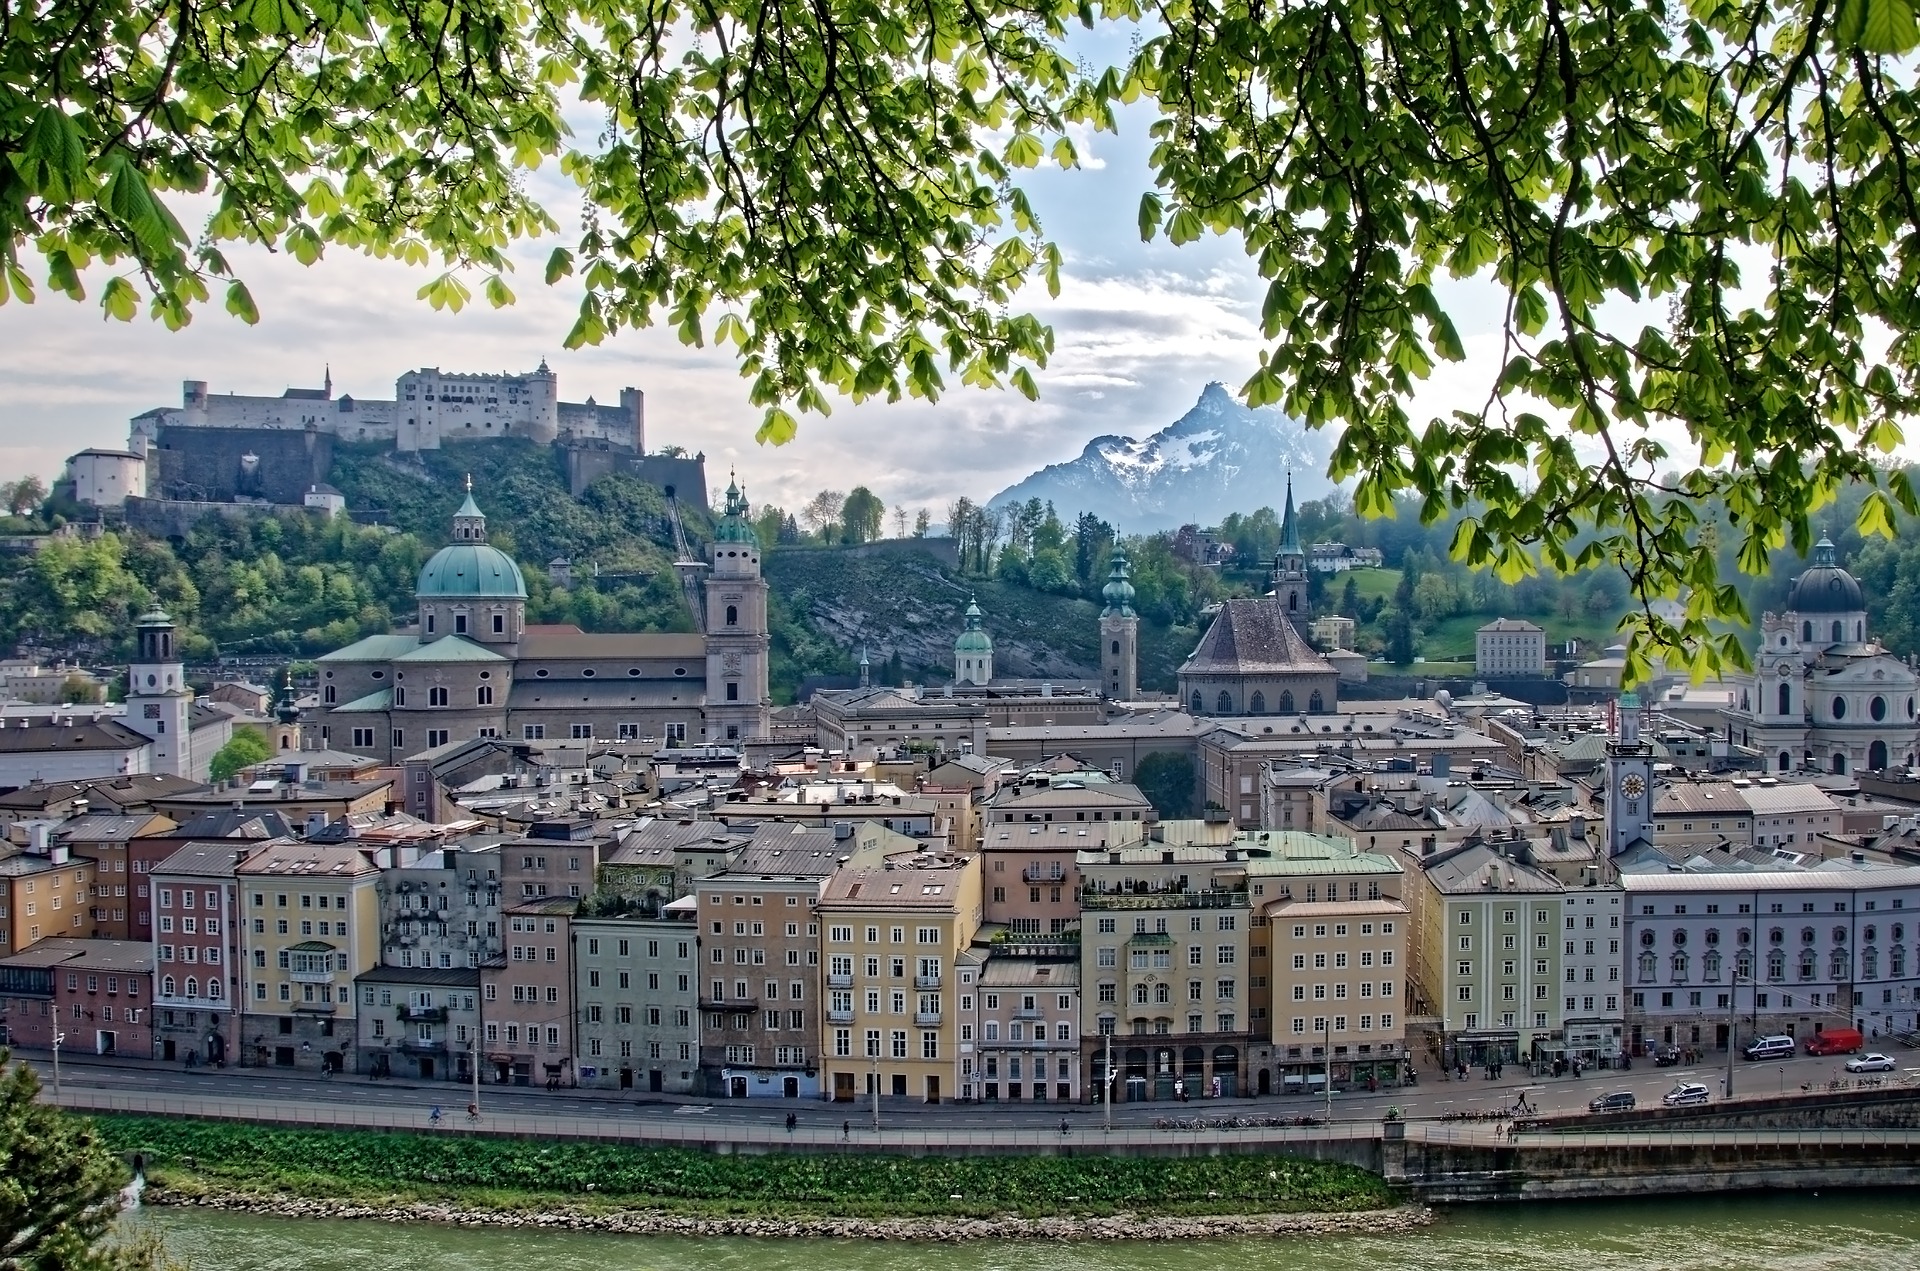 Colorful buildings and a castle with mountains in the background in the city of Salzburg, as pictured from above